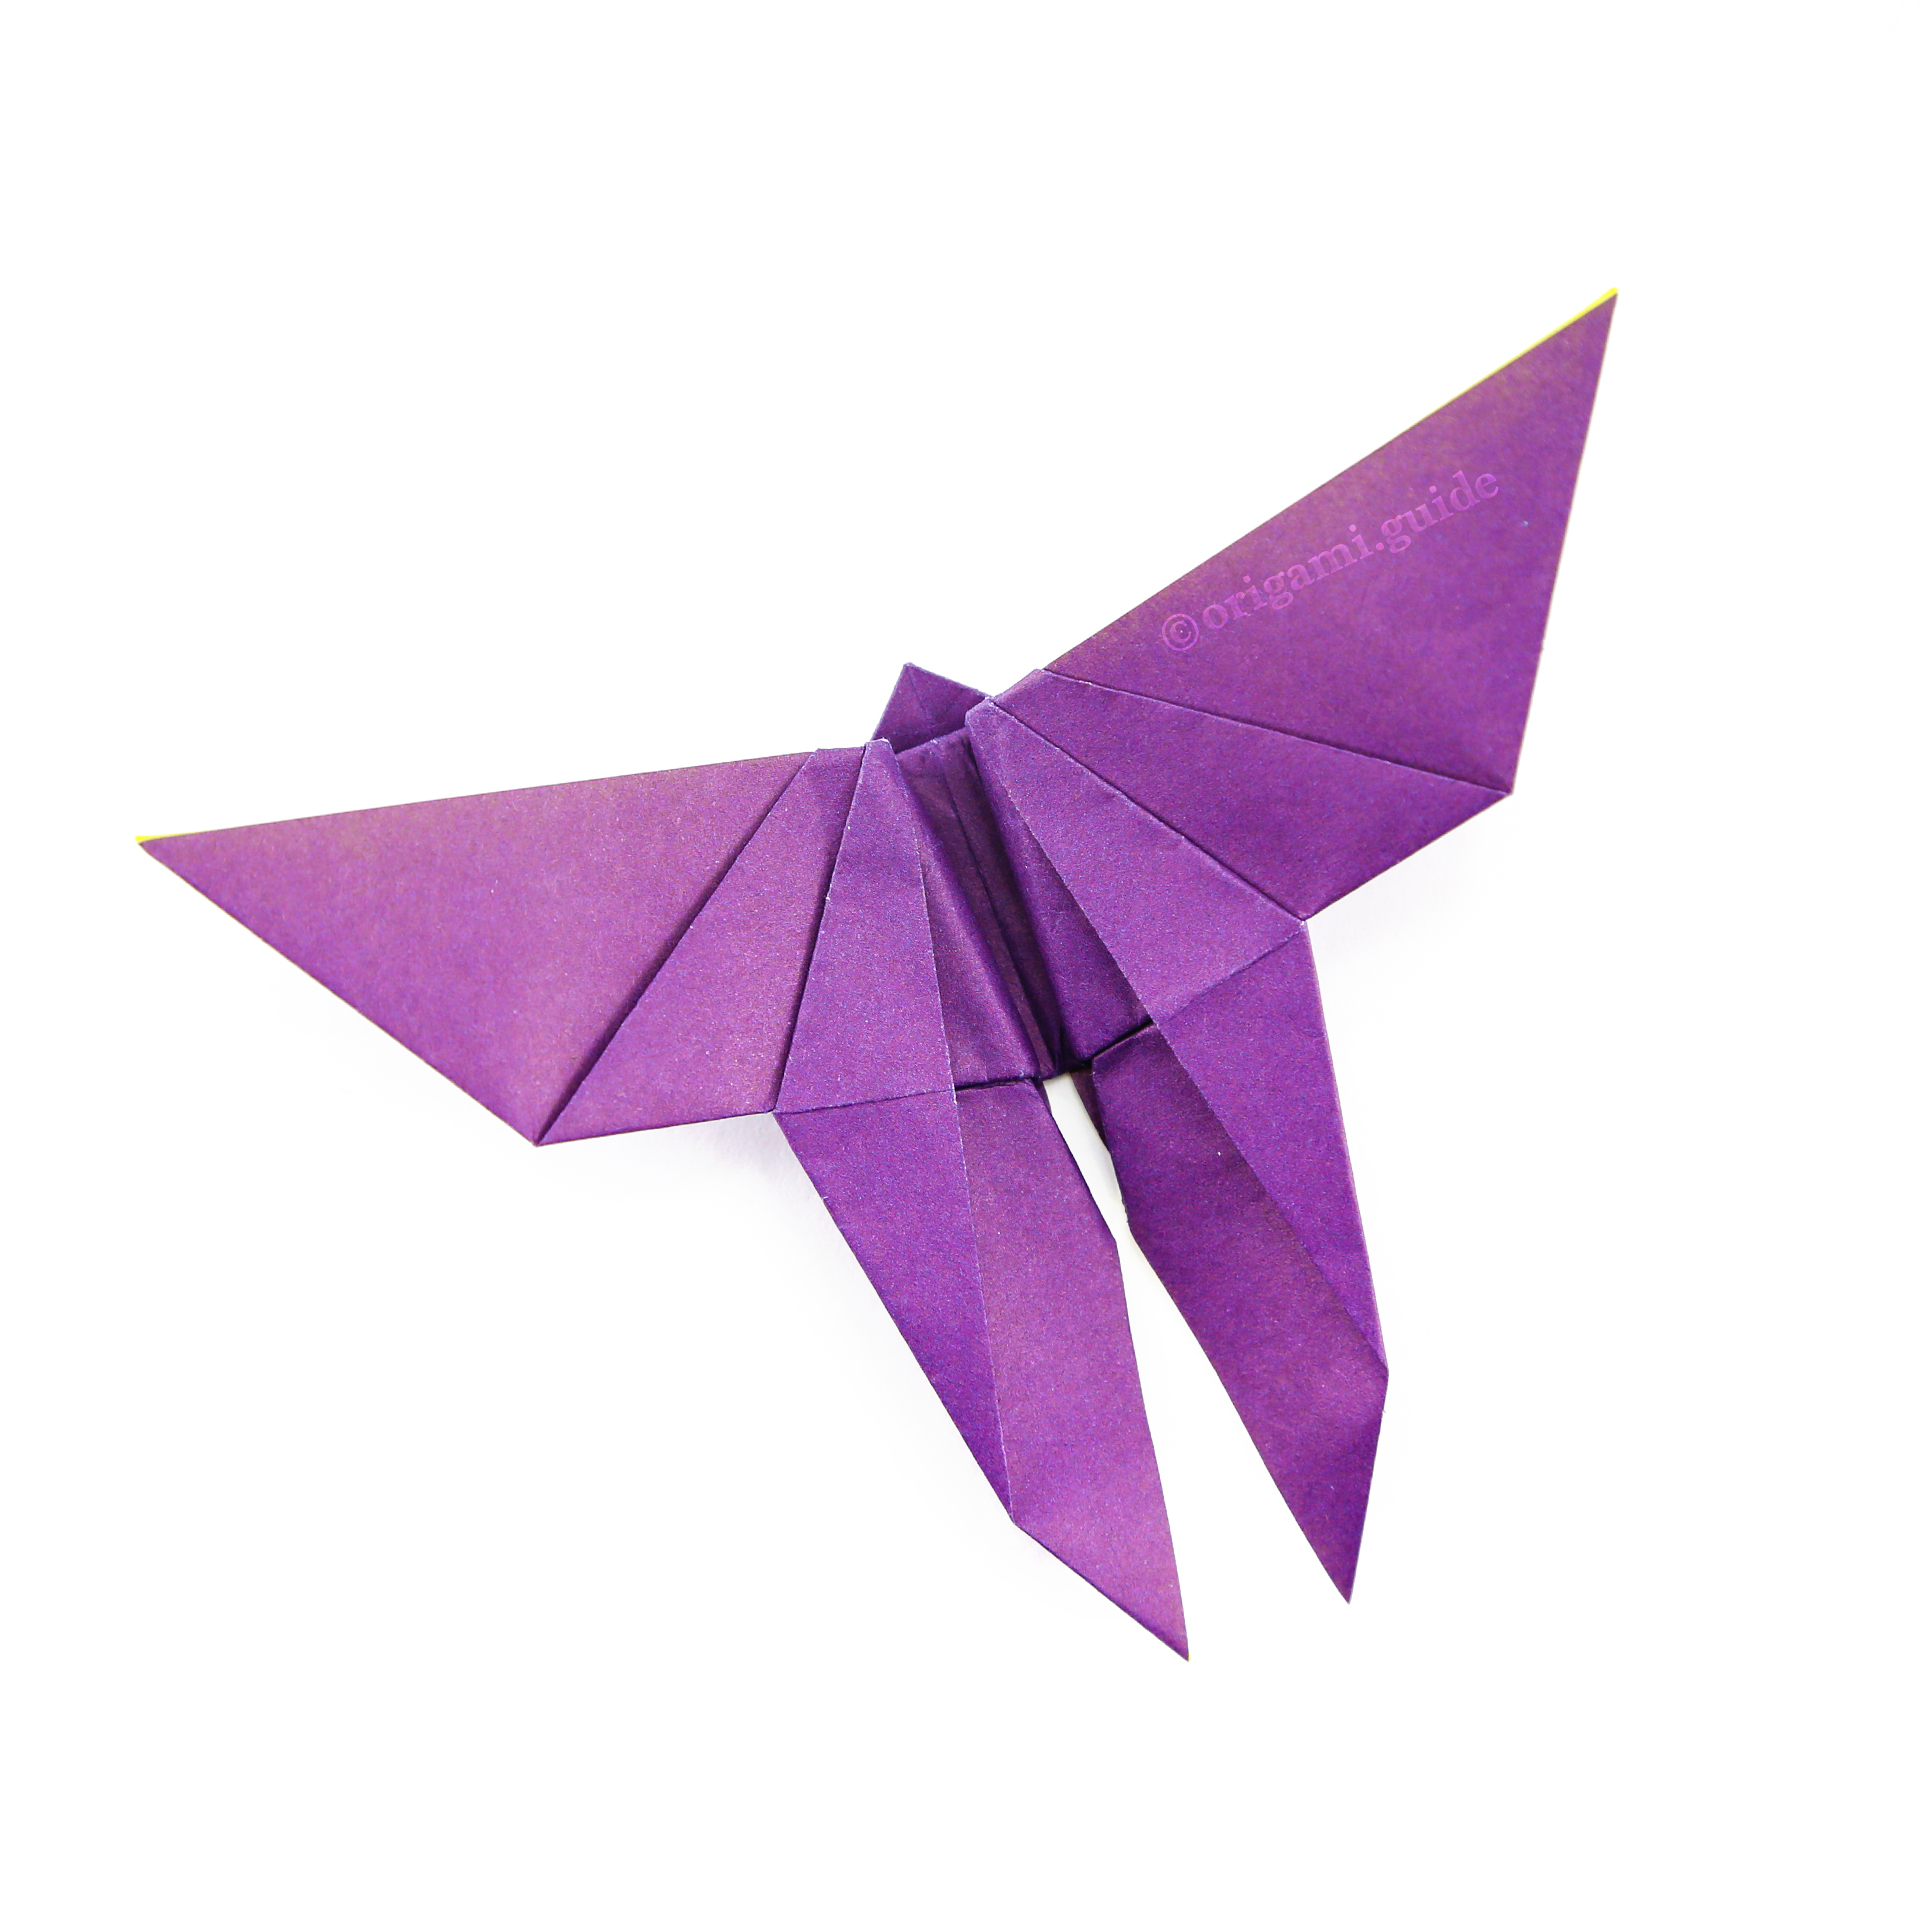 Types of butterfly origami - Julisino